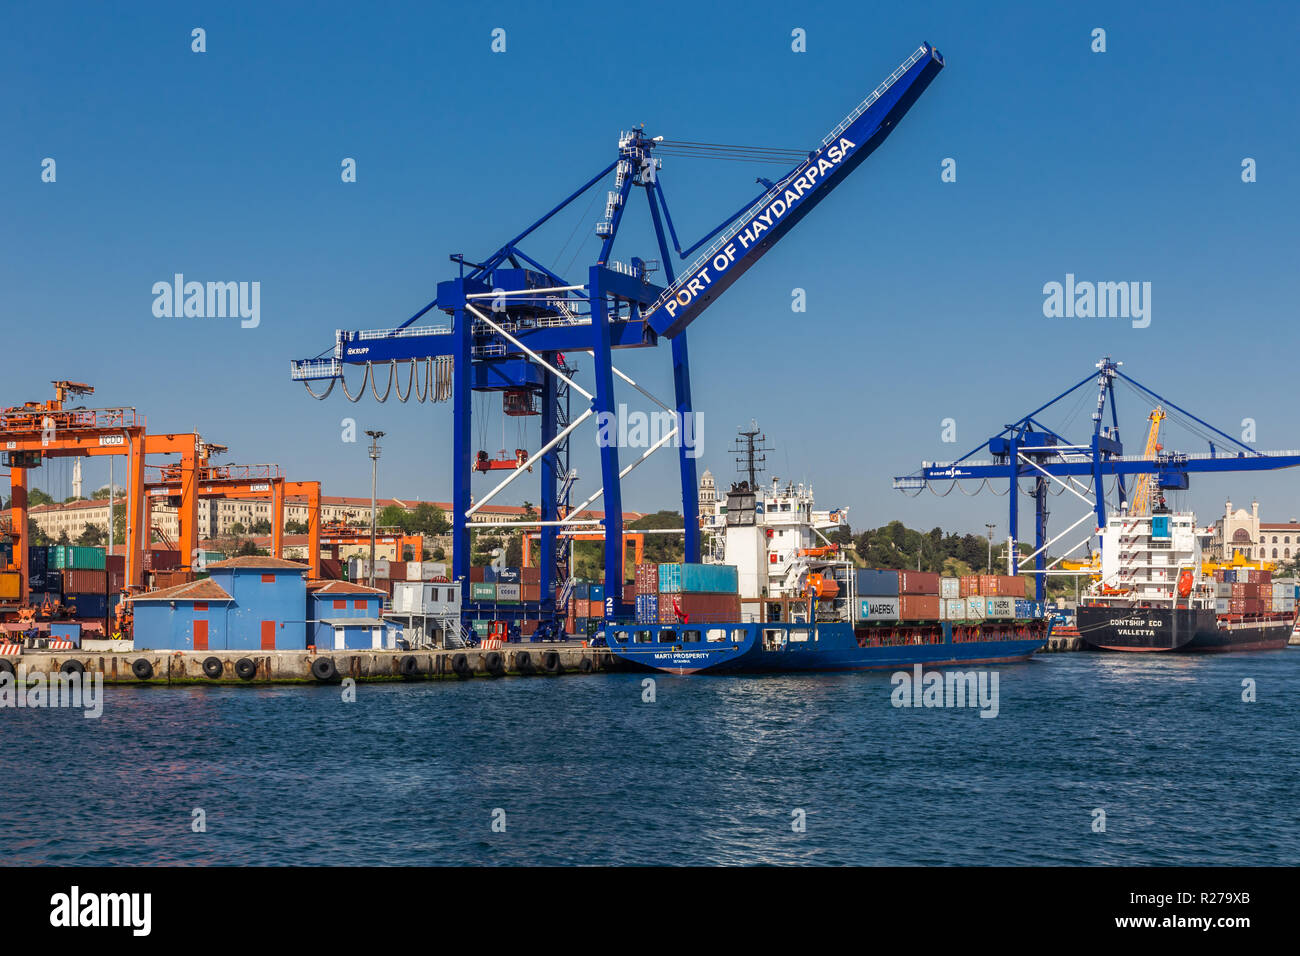 Istanbul, Turkey, April 29, 2013: View of Haydarpasa Container  Terminal, showing cranes and container ships. Stock Photo